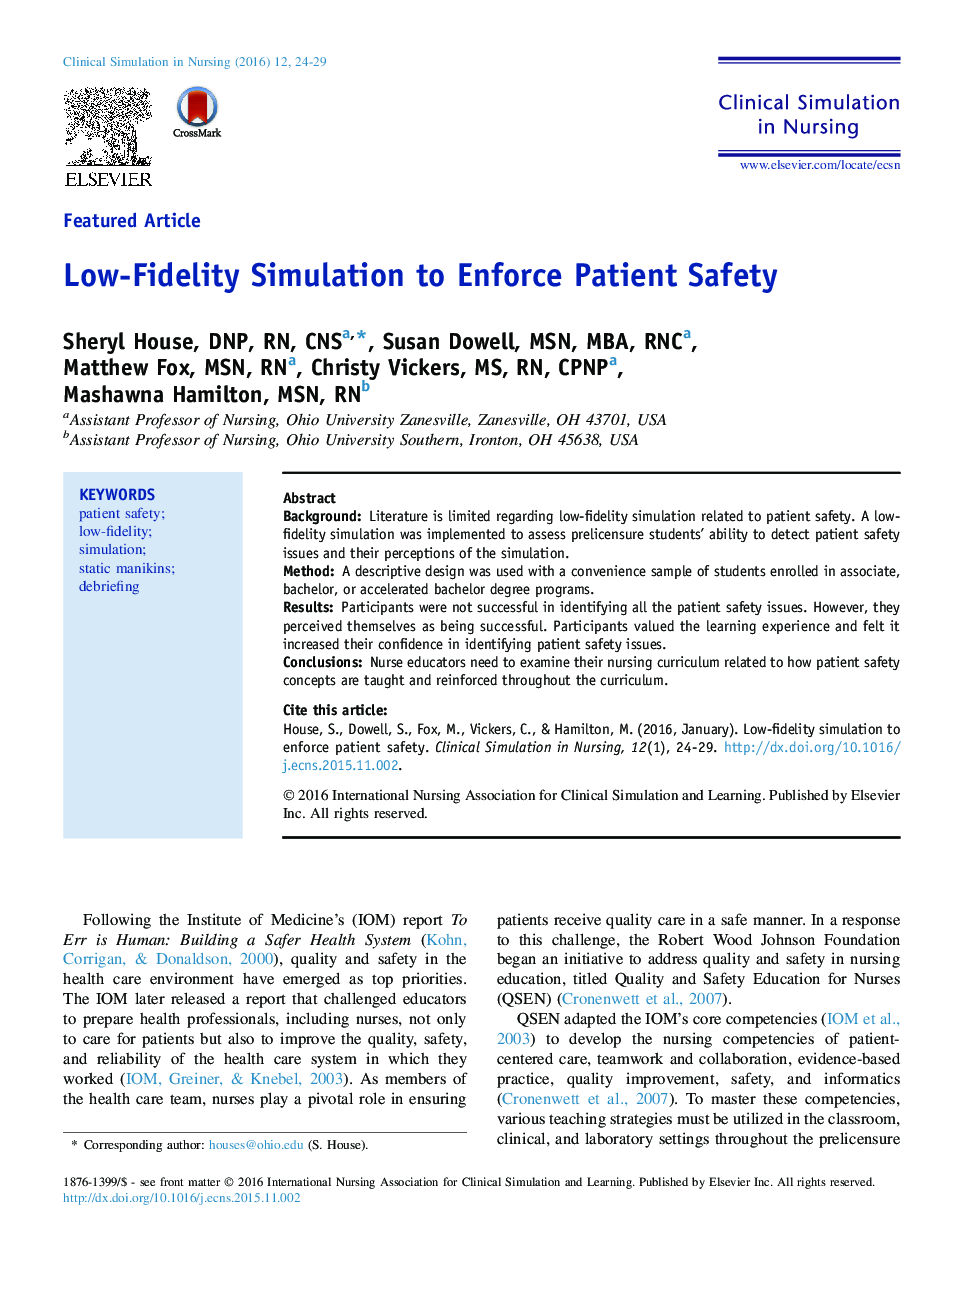 Low-Fidelity Simulation to Enforce Patient Safety